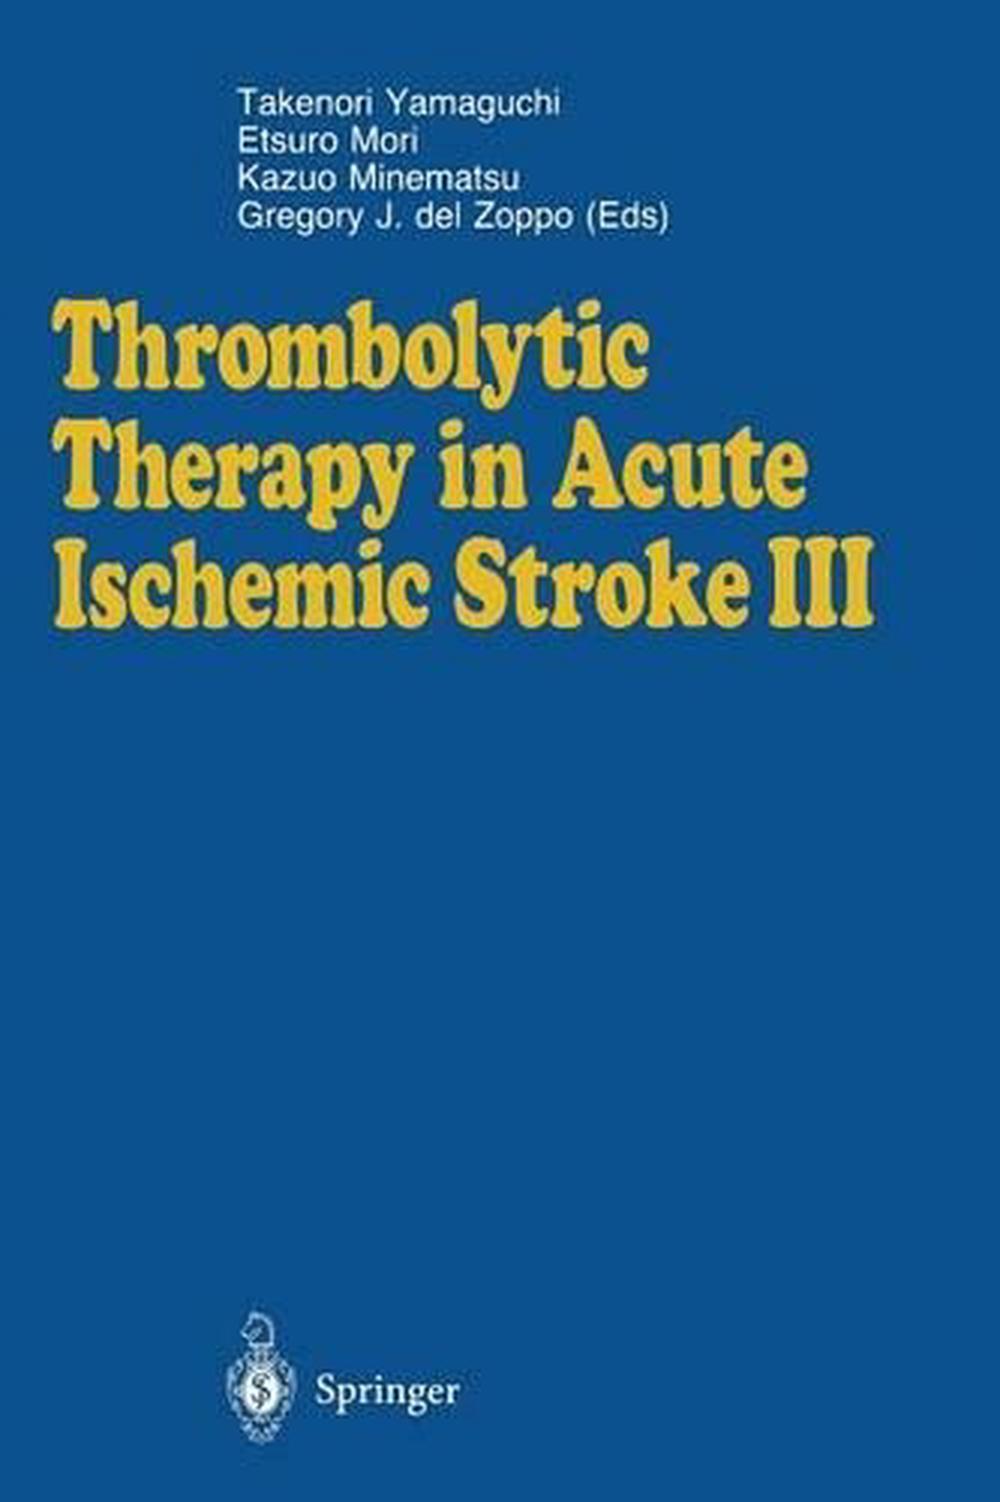 Thrombolytic Therapy in Acute Ischemic Stroke III (English) Paperback ...